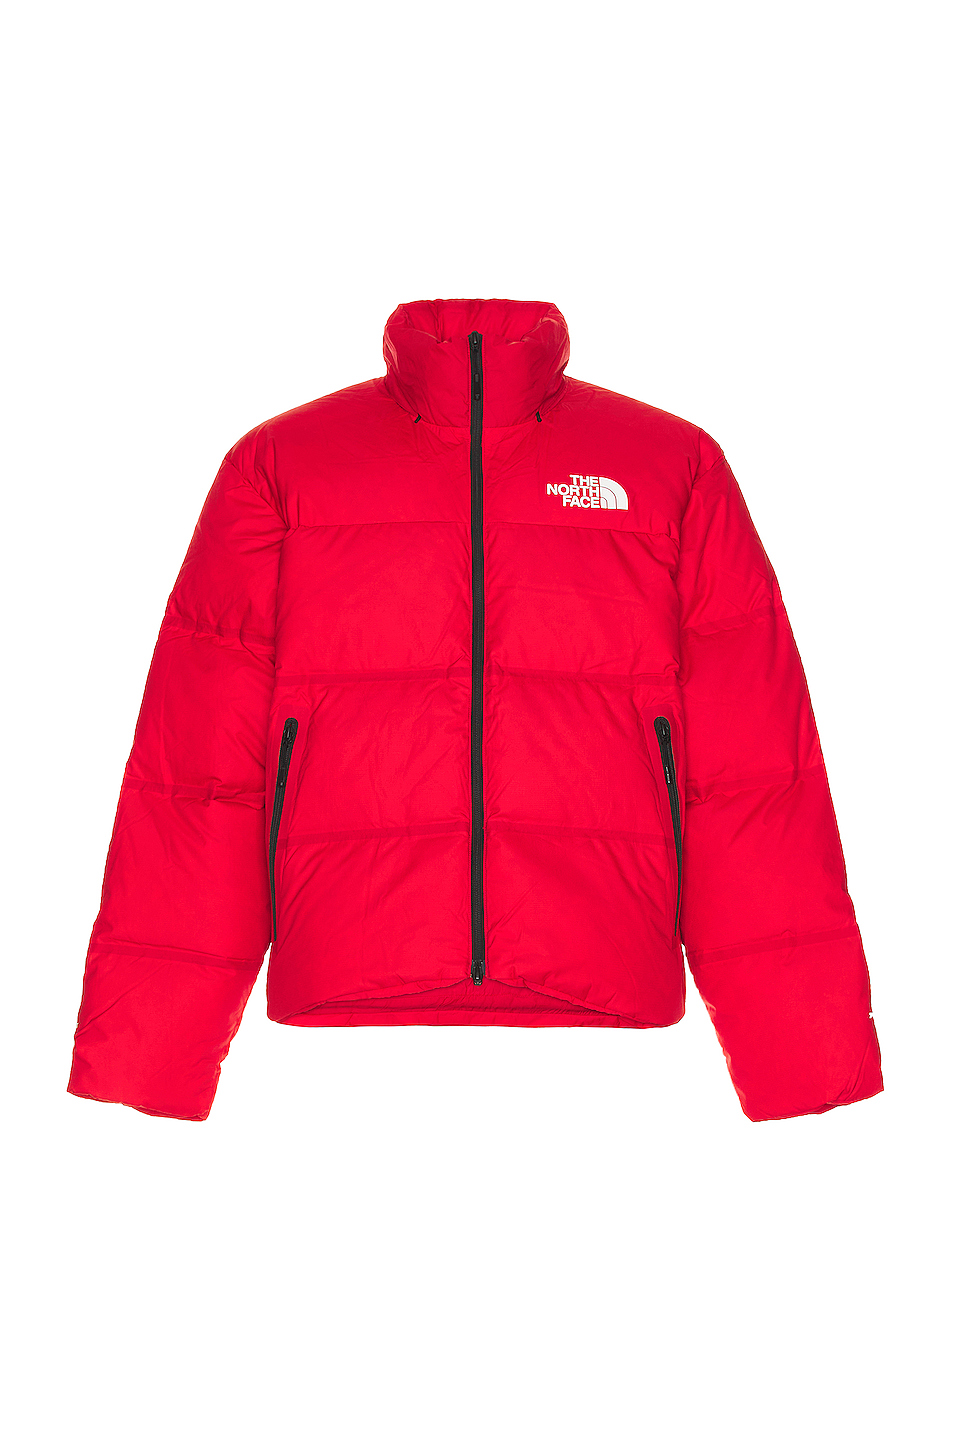 The North Face RMST Nuptse Jacket in TNF Red | FWRD